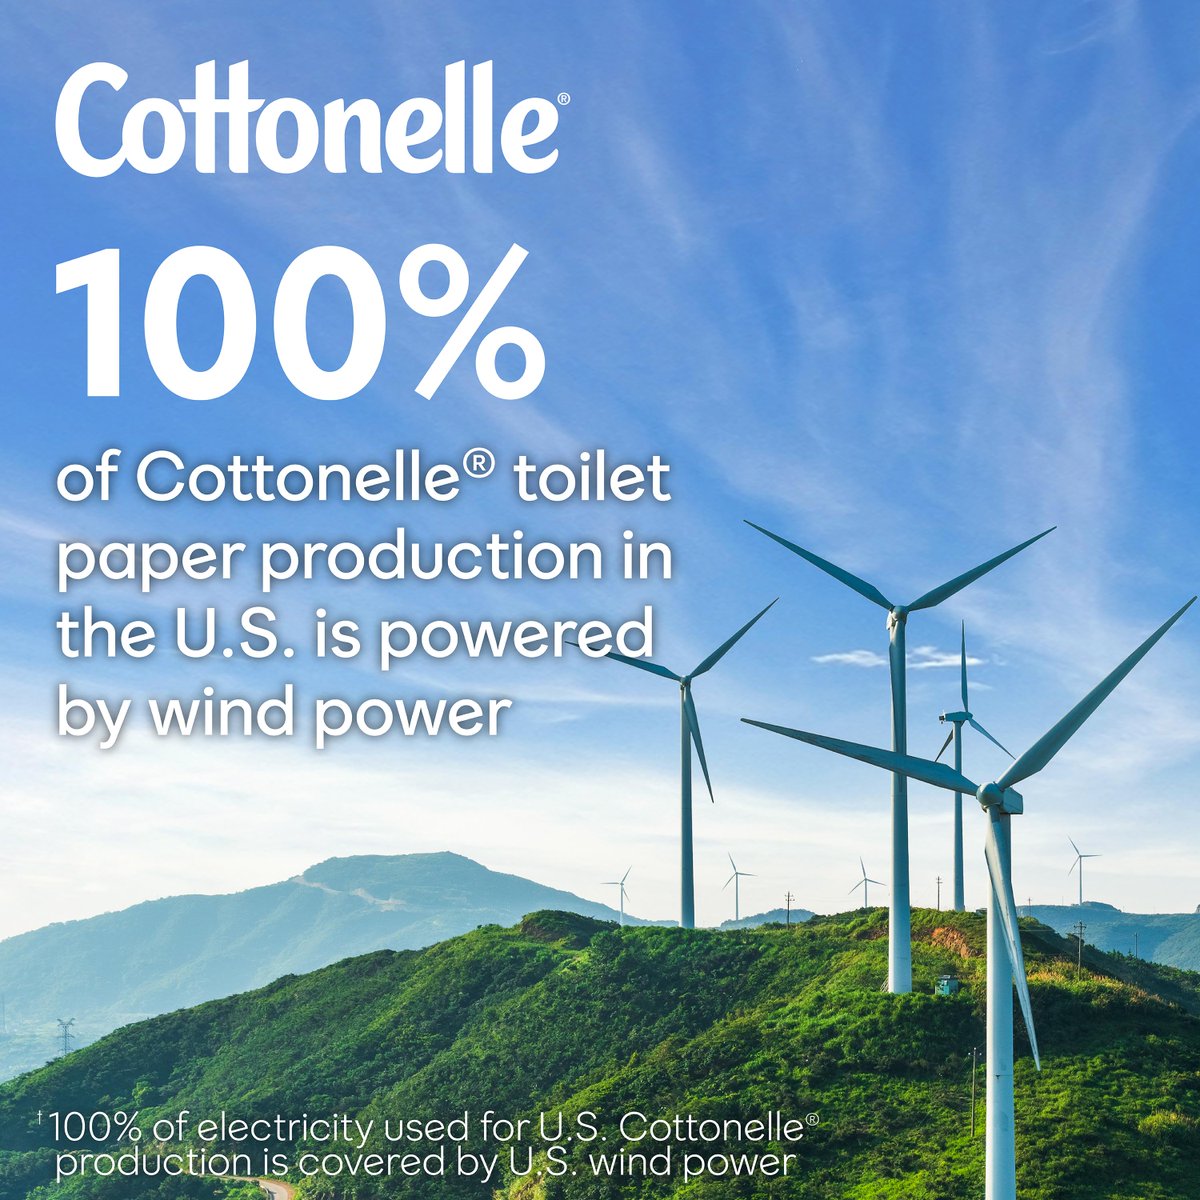 You’ll feel refreshed and renewed when choosing #Cottonelle® because 100% of our tp production in the U.S is #sustainably wind powered*🍃 *off-setting 100% purchased electricity with power generated at U.S. wind farms